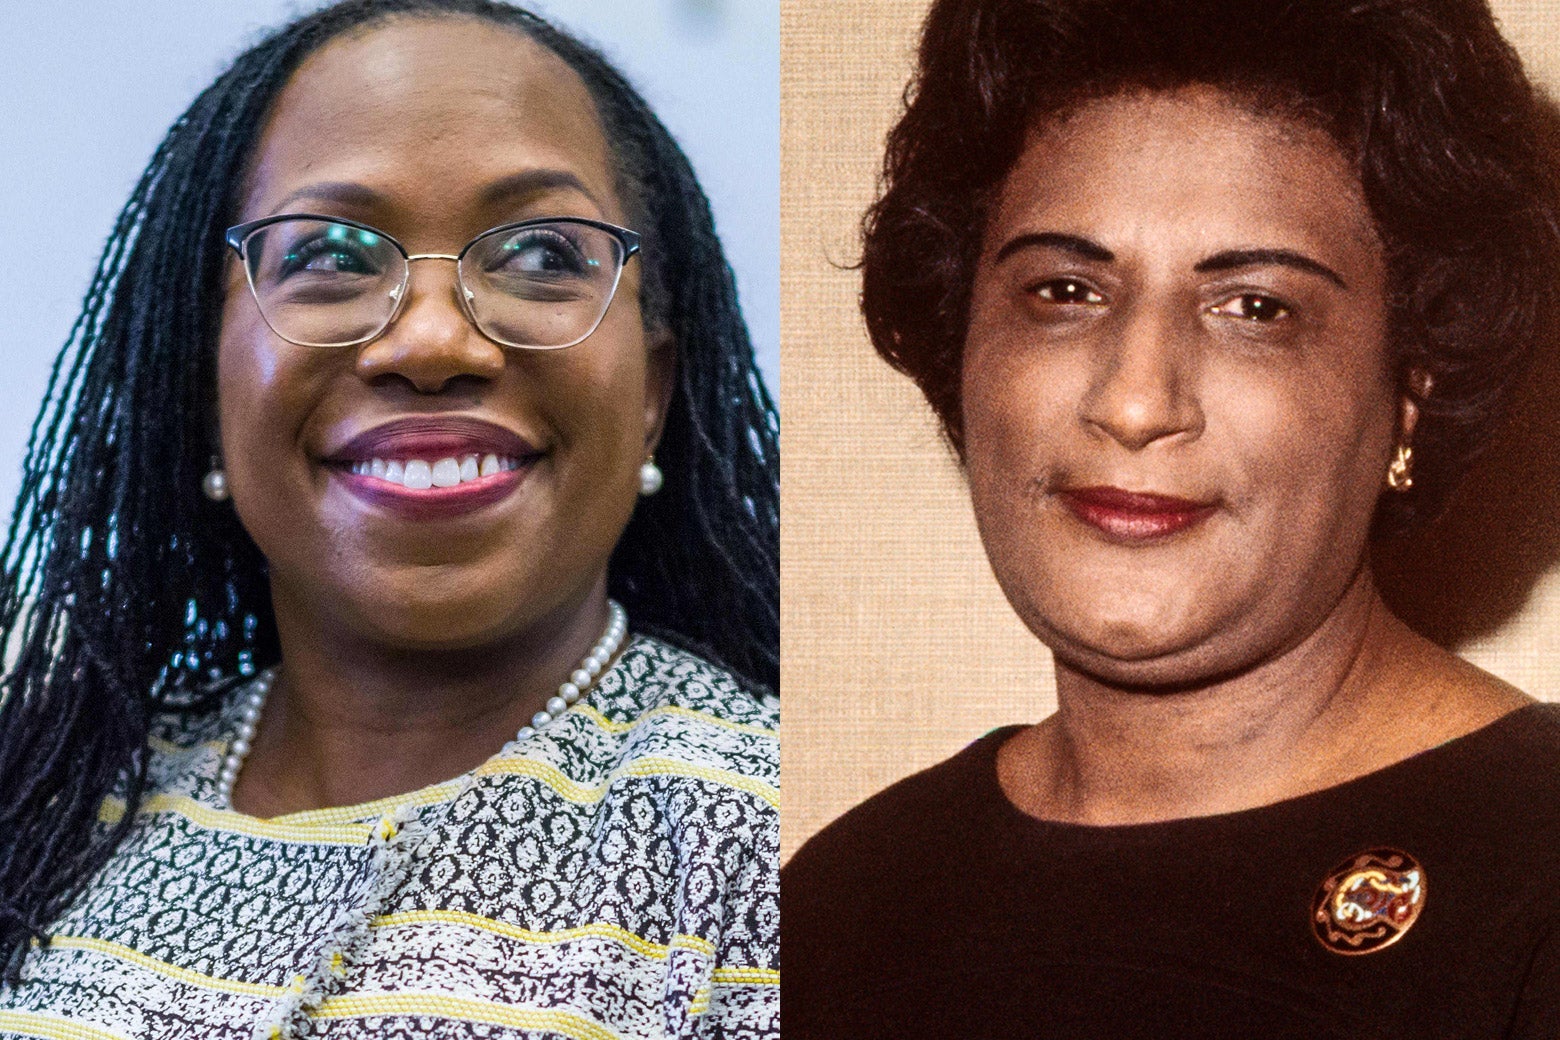 A diptych of close-up photos of the two judges Ketanji Brown Jackson and Constance Baker Motley.